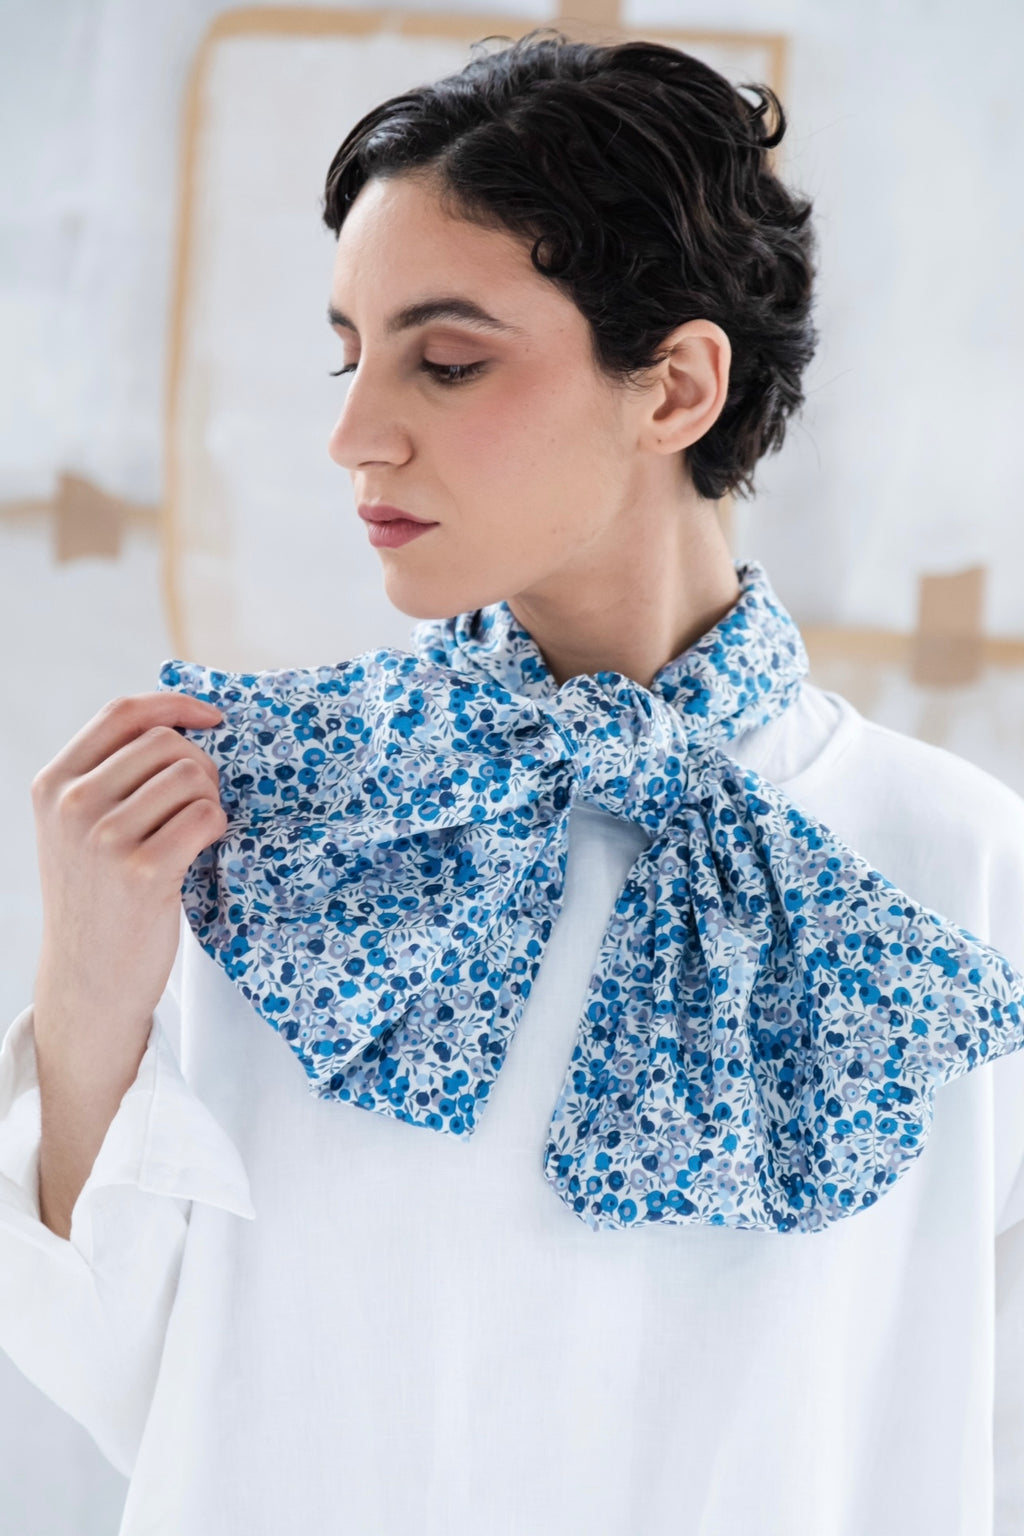 Obi Scarf | Made with Liberty Fabric | Wiltshire